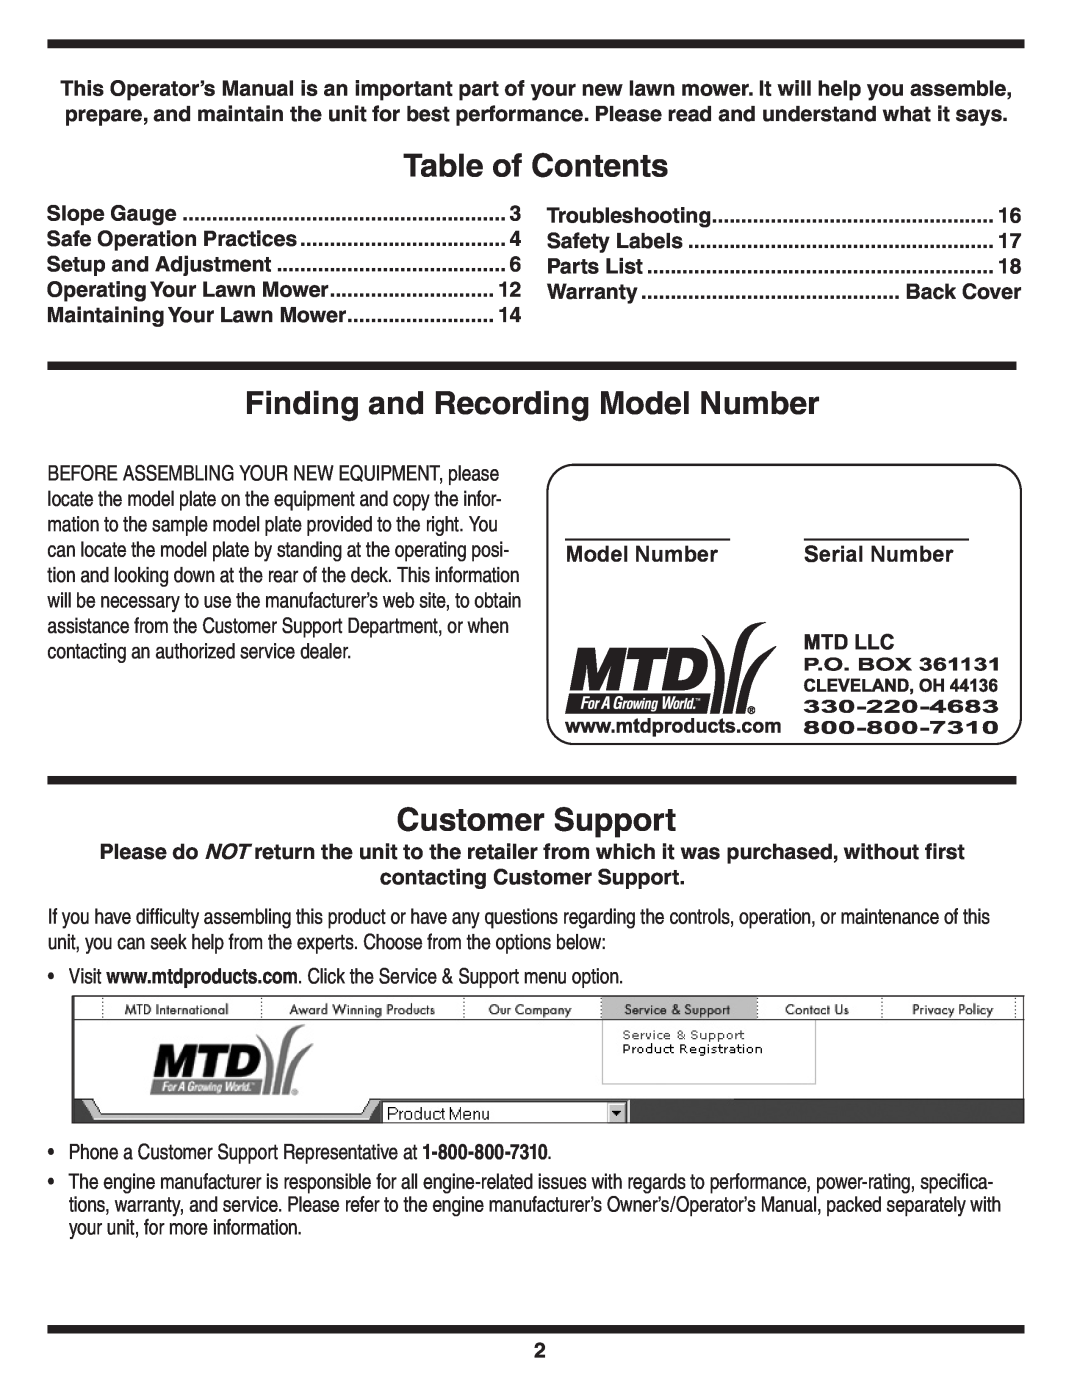 MTD 30 warranty Table of Contents, Finding and Recording Model Number, Customer Support, Serial Number 